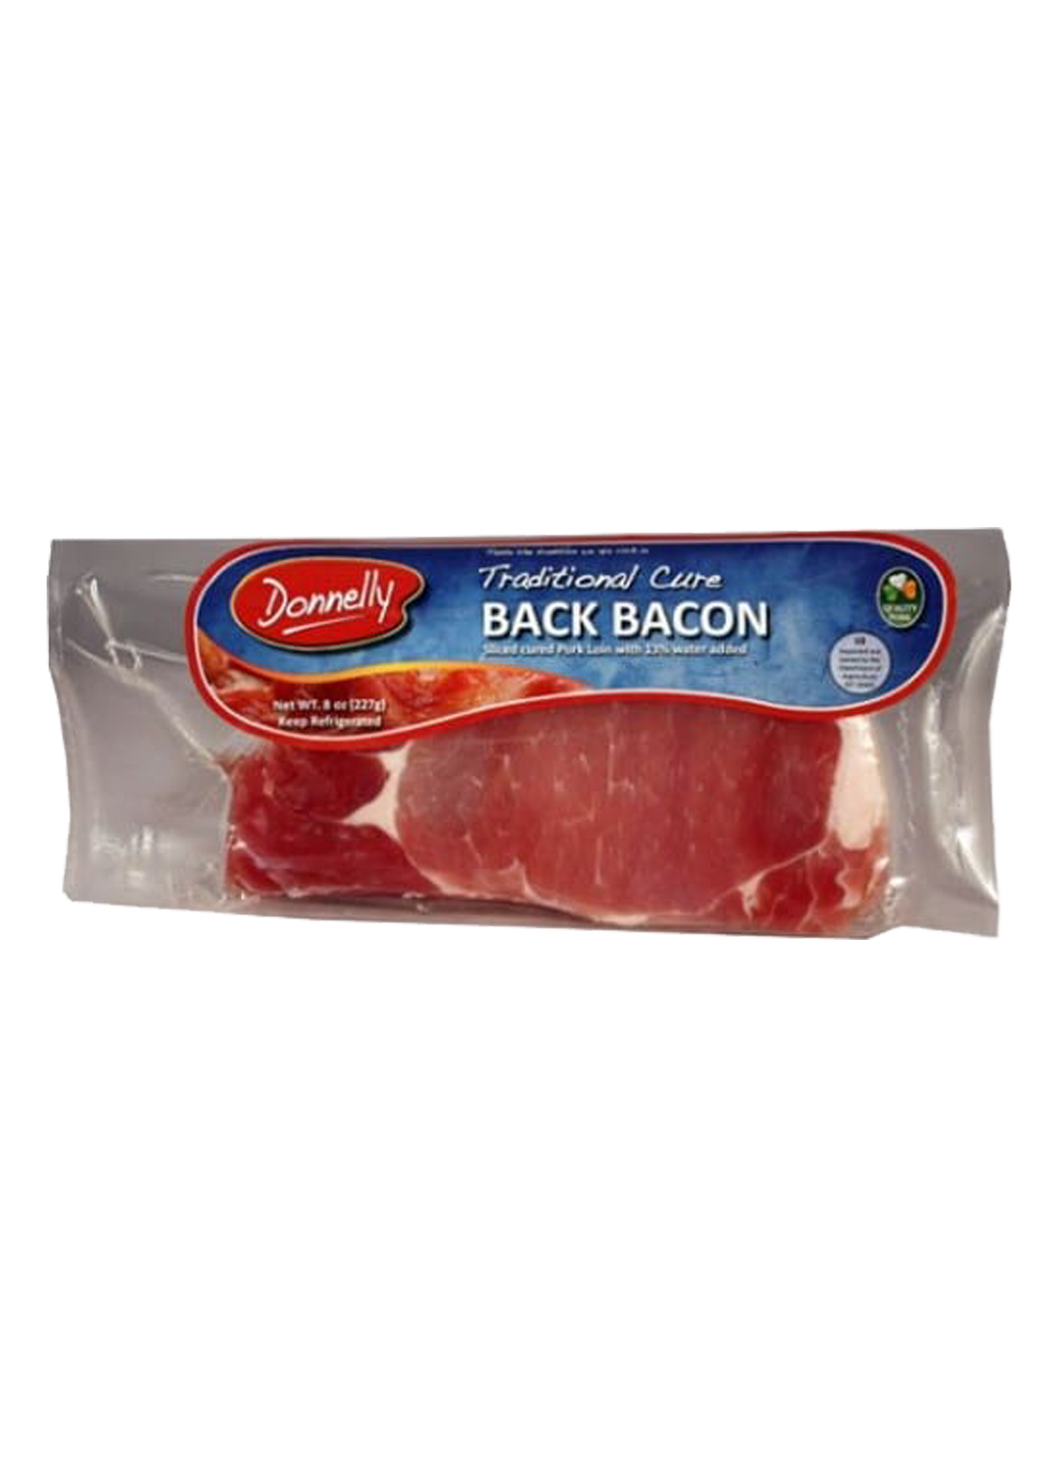 Donnelly Traditional Cure Back Bacon 227g